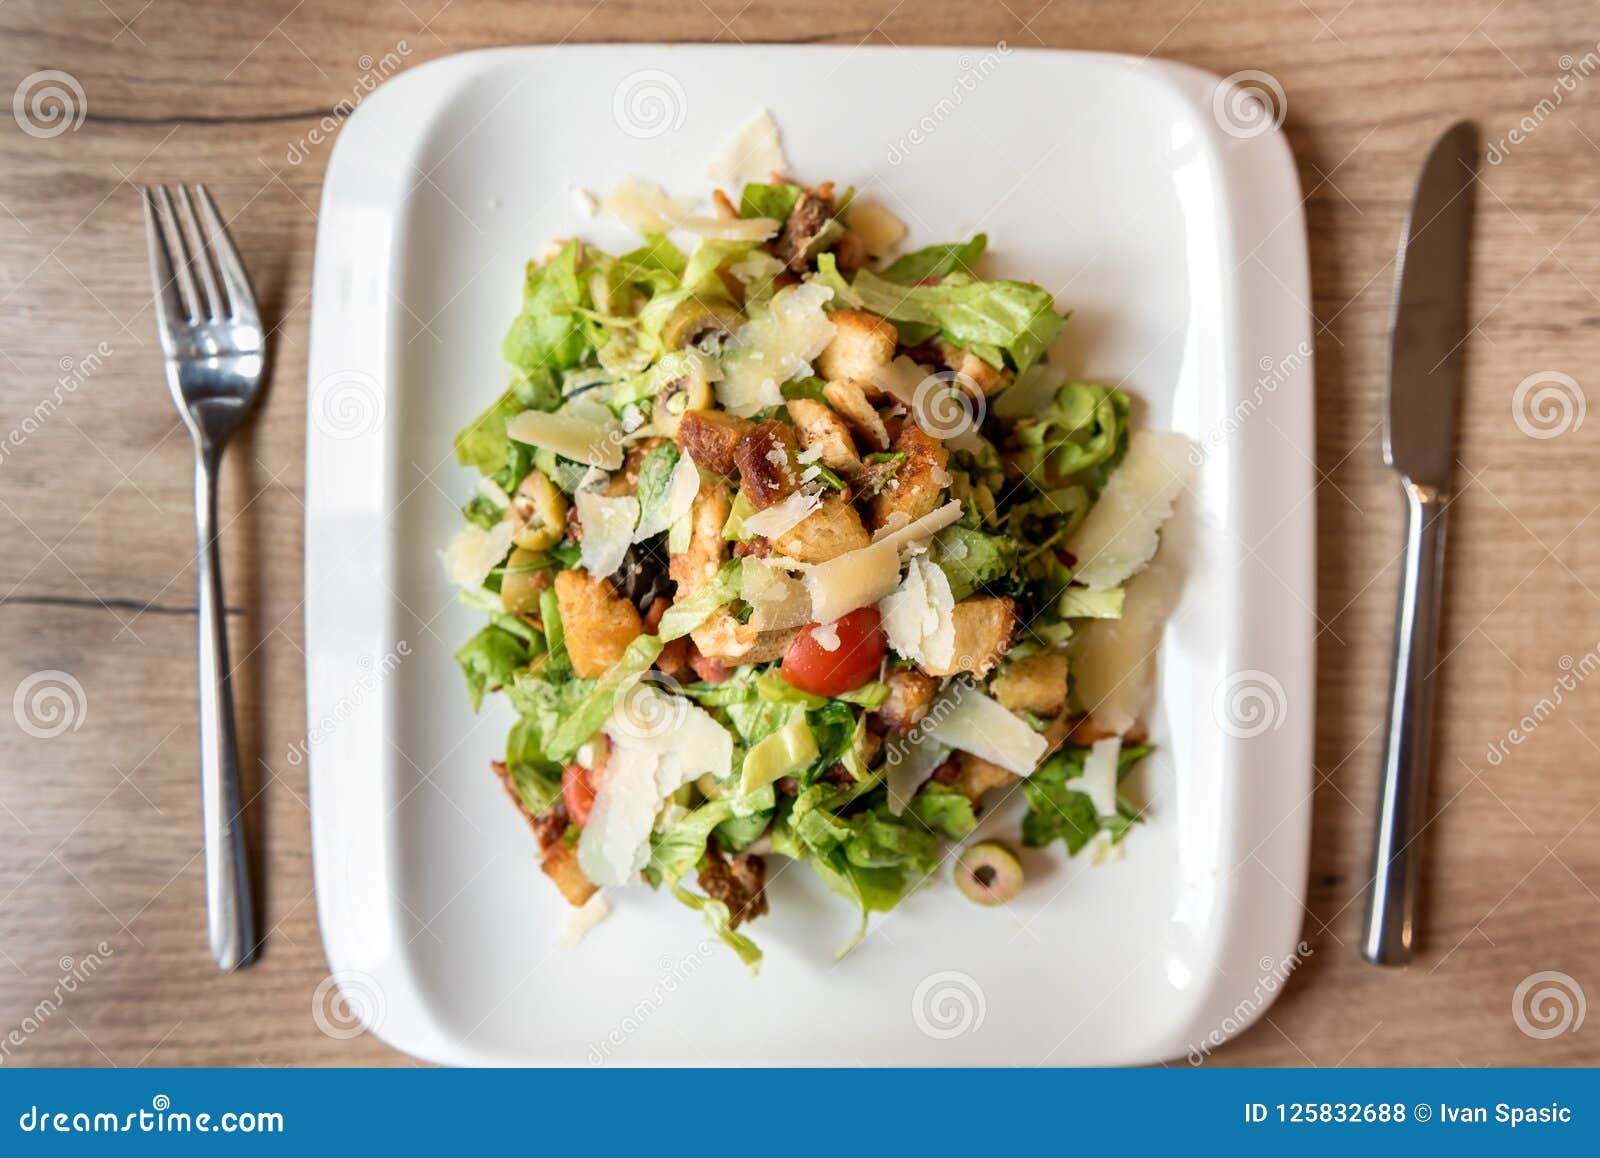 plate of caesar salad on wooden table